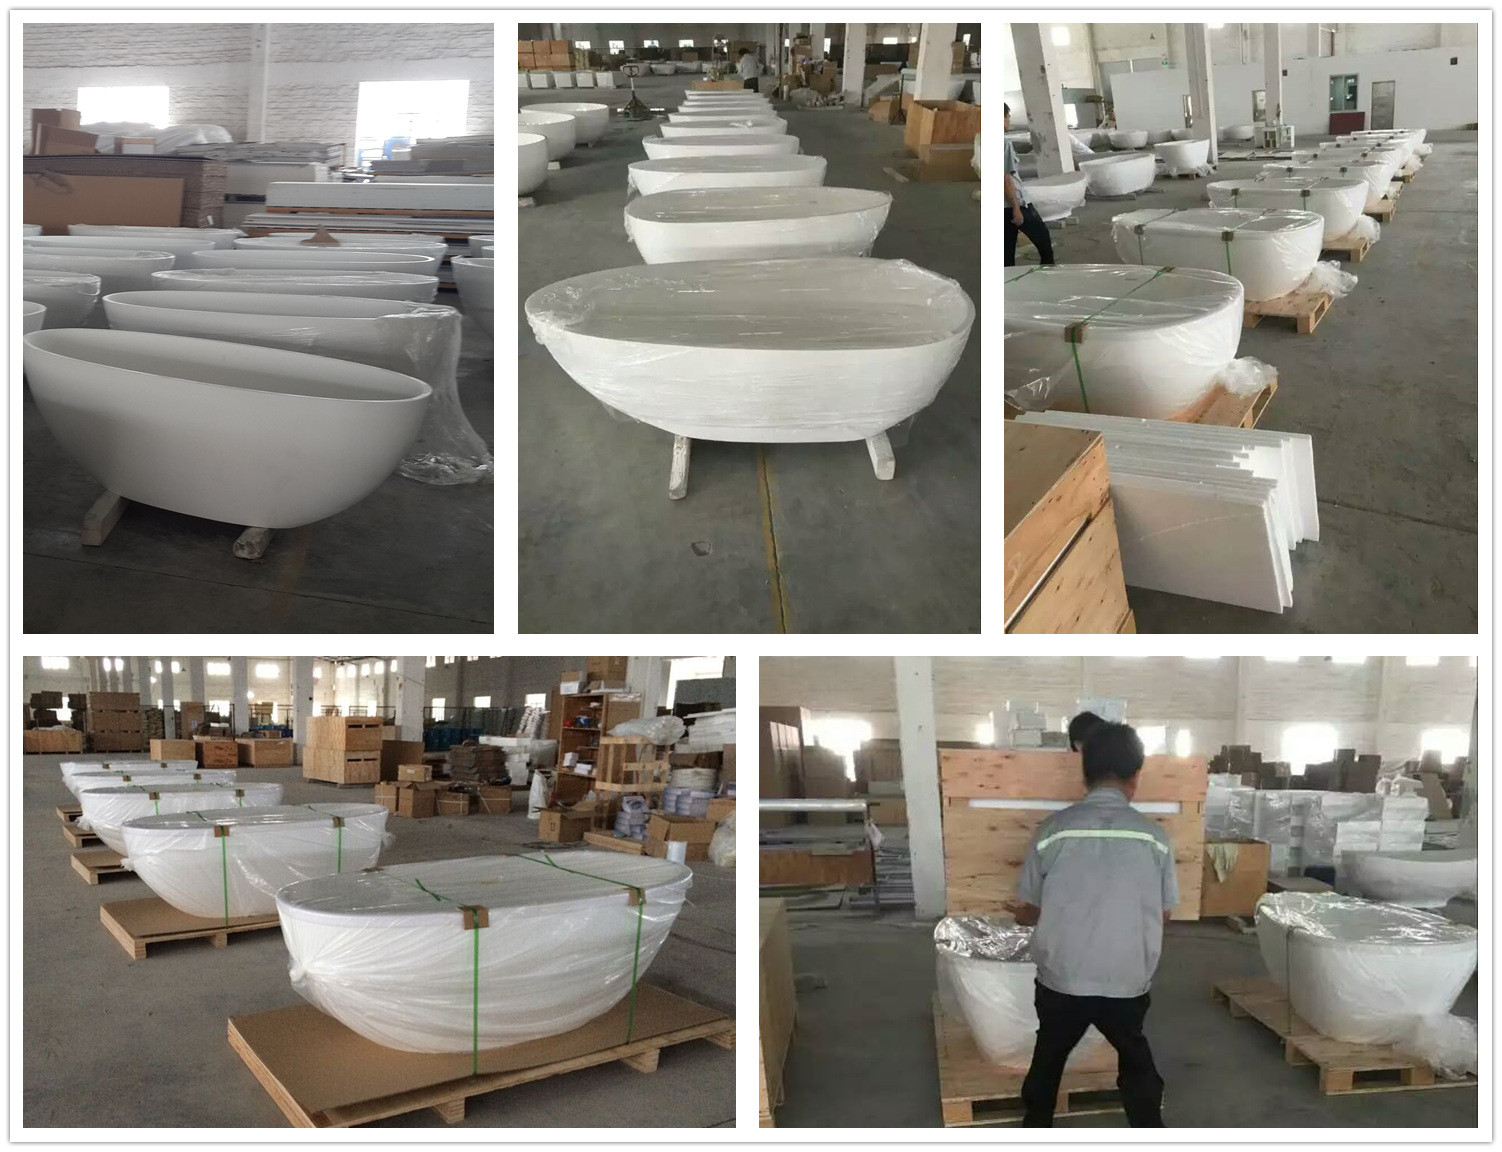 Bellissimo-Stone Cast Resin Oval Shaped Solid Surface Freestanding Bathtub-9